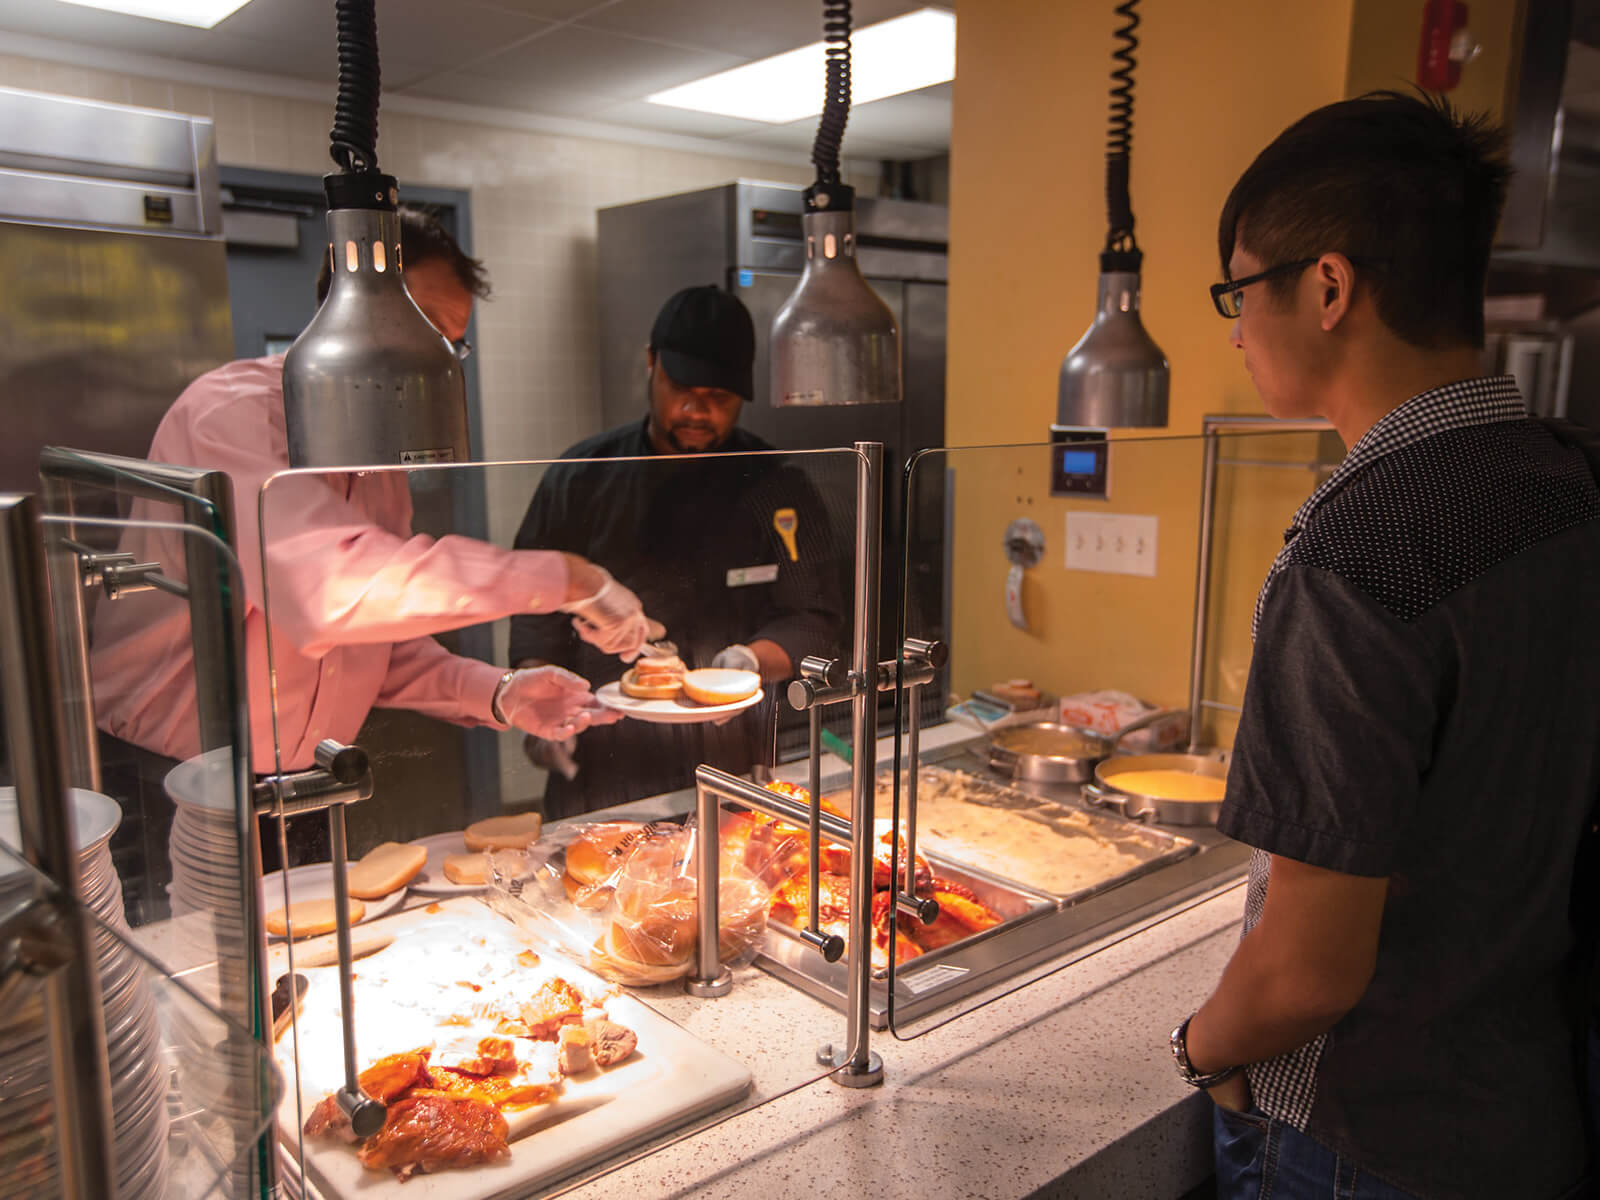 A photo of FIU dining staff serving food at 8th Street Kitchen